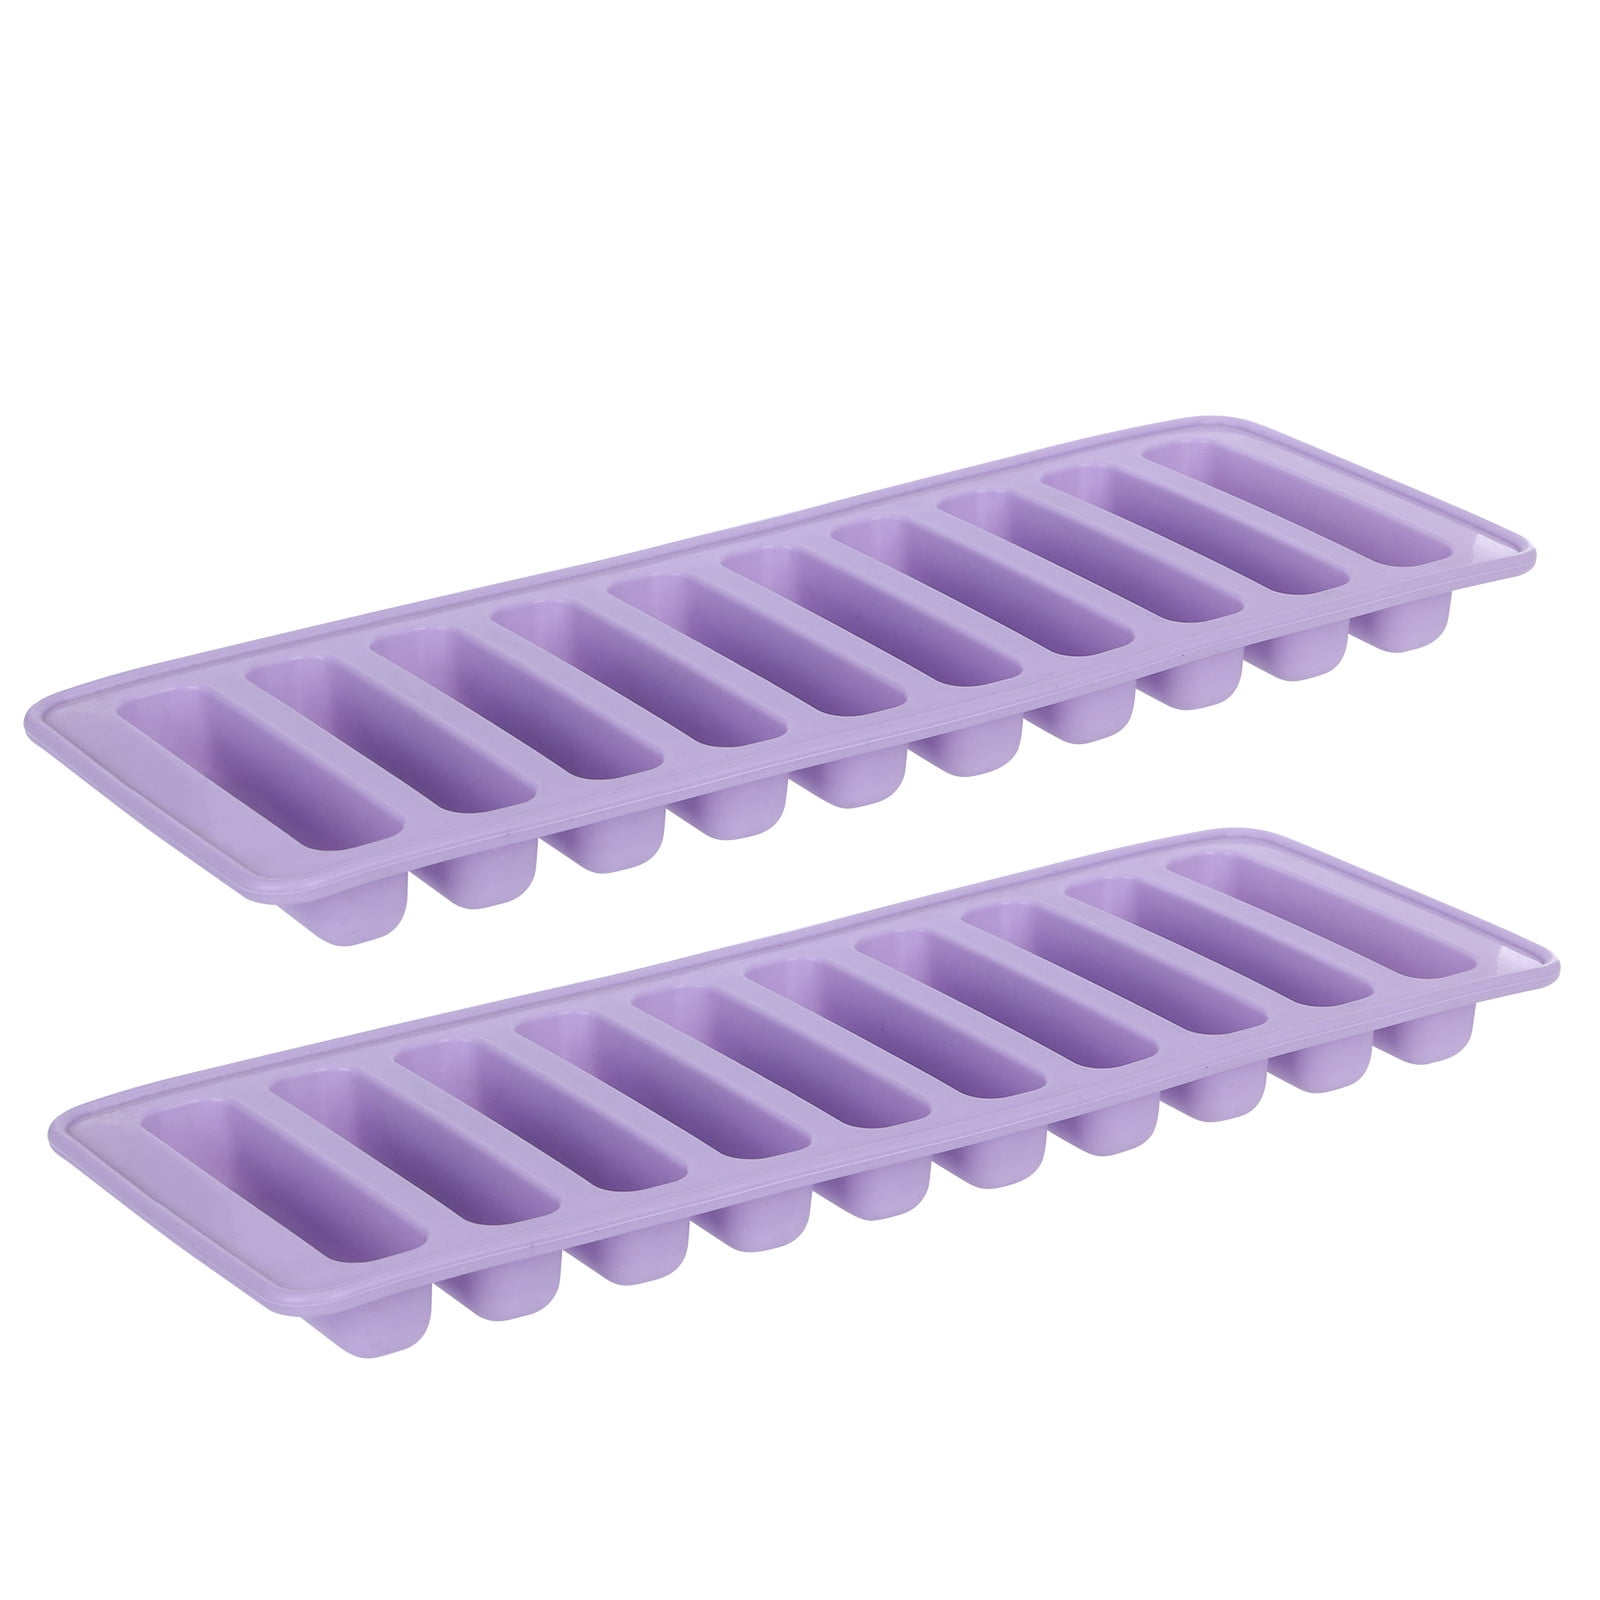 Prepworks by Progressive Icy Bottle Stick Trays Set of 3 Cylinder Ice Cubes Ice Cube Tray 